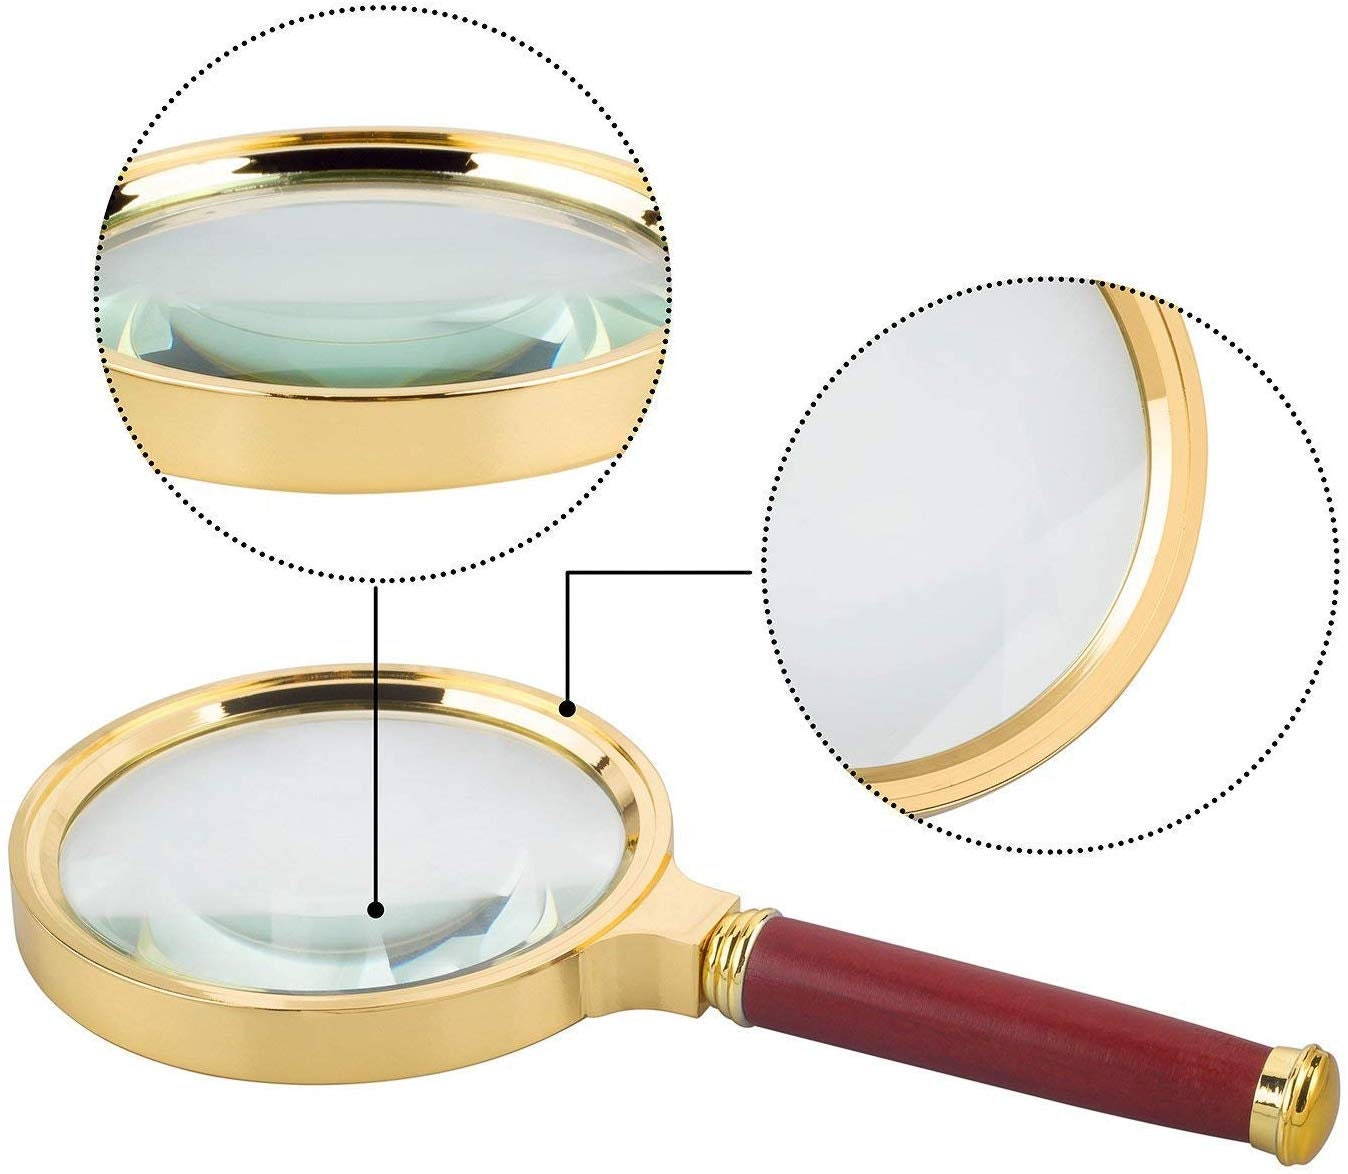 Magnifying Glass with Light,30X Magnification Handheld Magnifier with 13 LED Light Double Lens Magnifying Glass for Reading, Newspaper, Antique, Explo